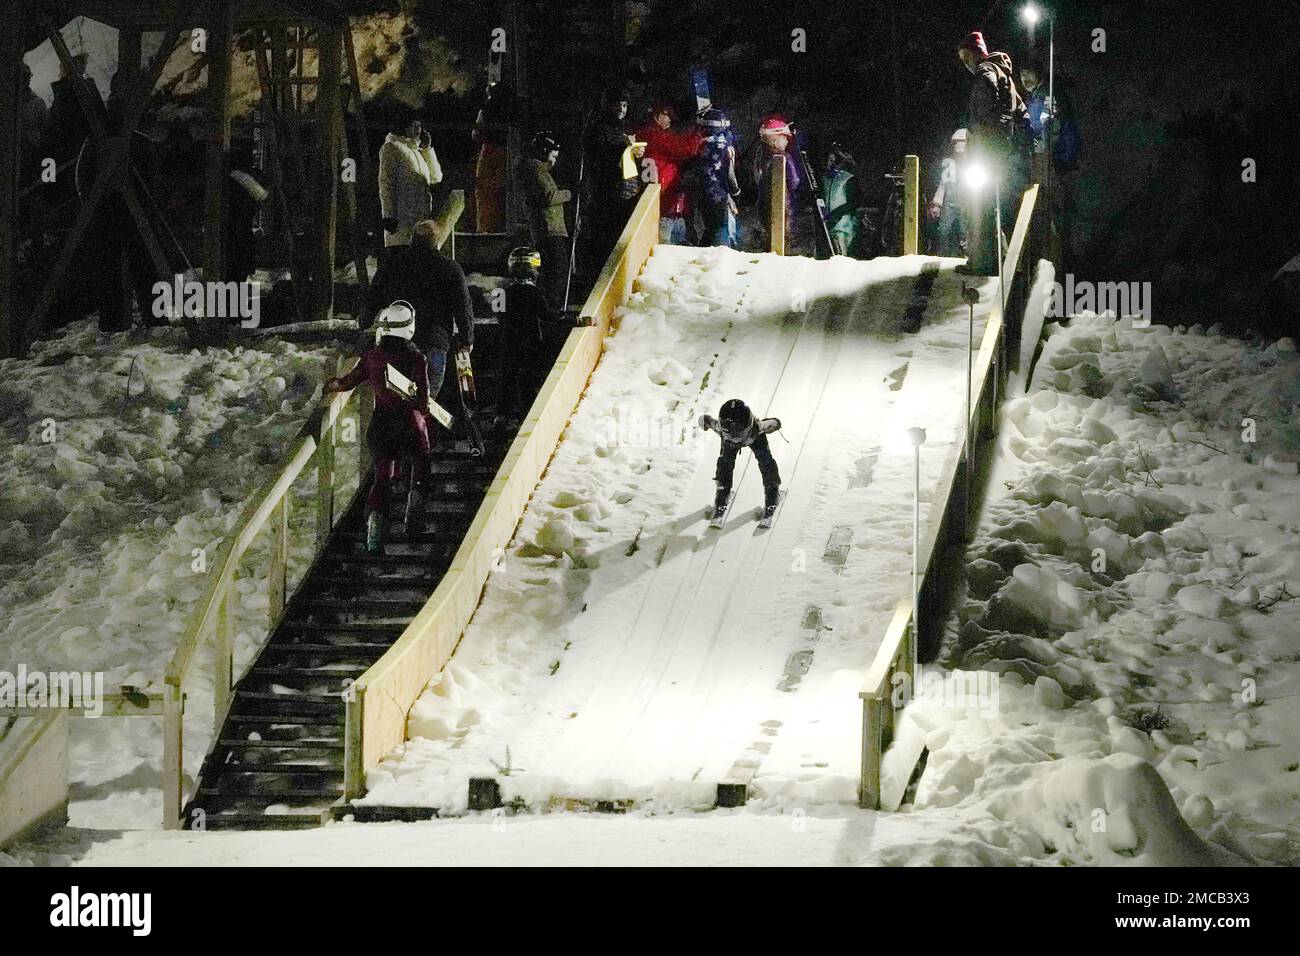 Julia Lindquist, 4, heads down the 5-meter ski jump Tuesday, Jan. 18, 2022,  at the Norge Ski Club in Fox River Grove, Ill. Lindquist was drawn to the  sport when her parents